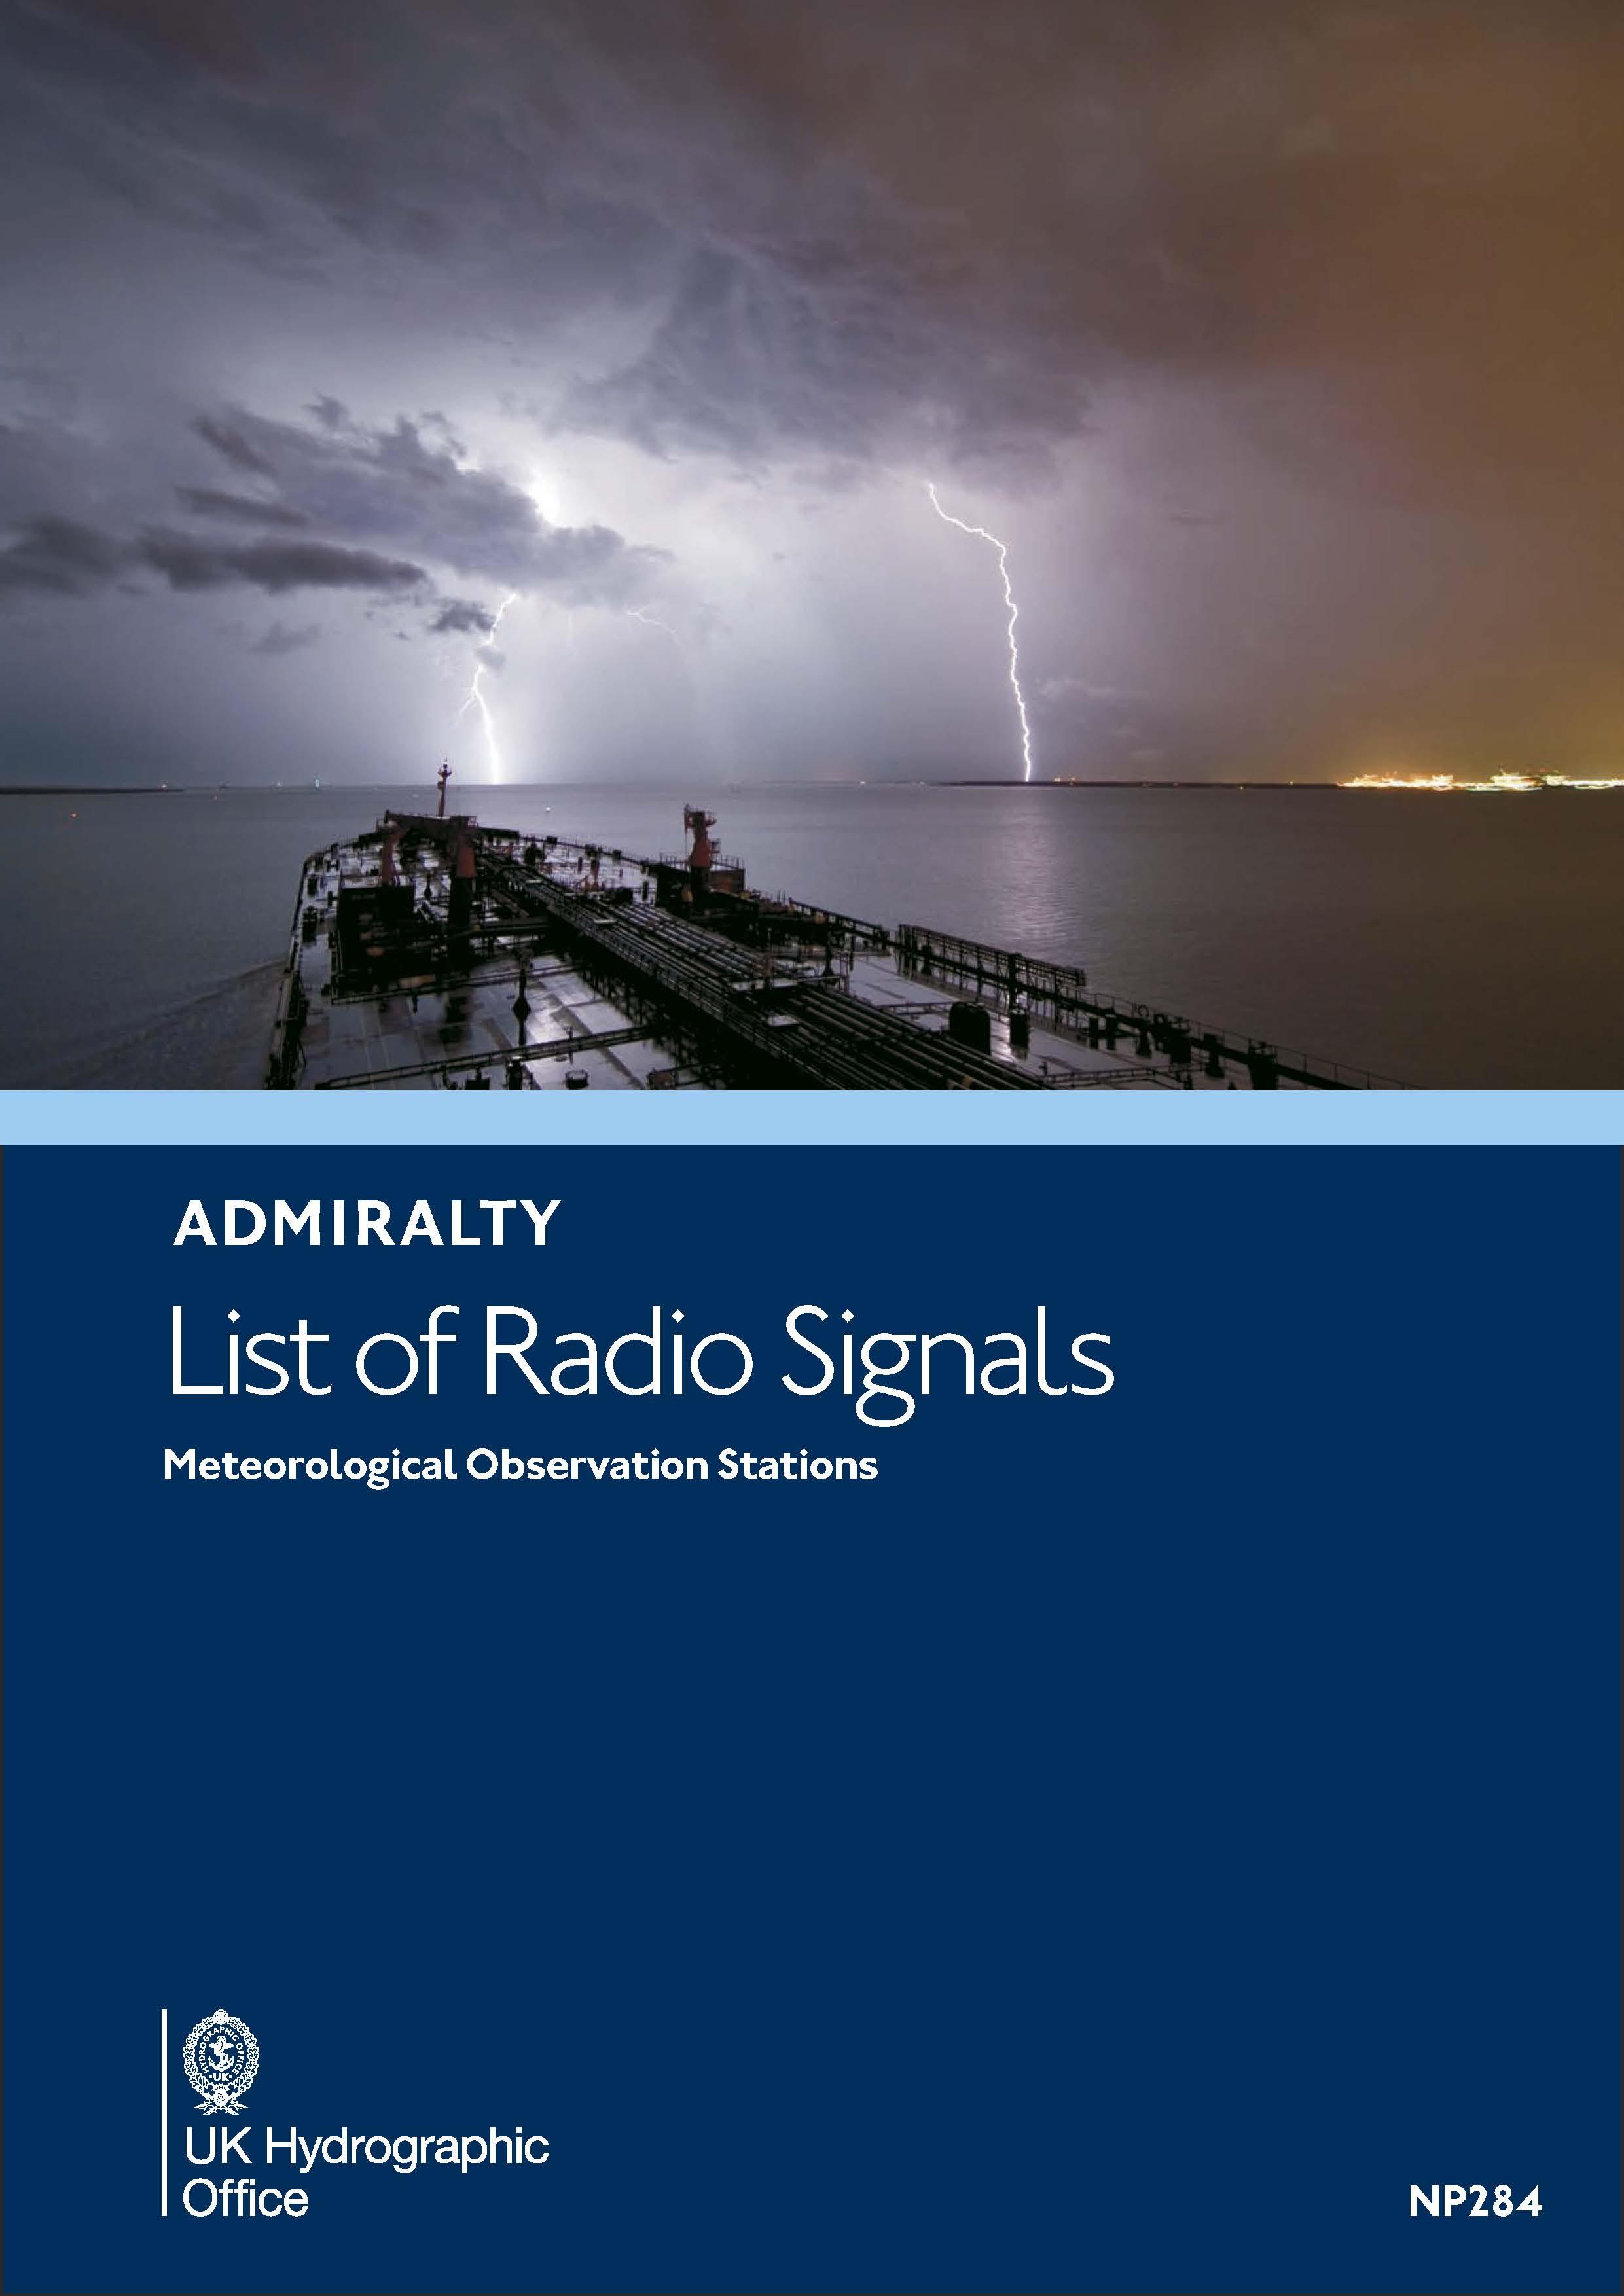 ADMIRALTY NP284 RadioSignals - Meteorological Observation Stations